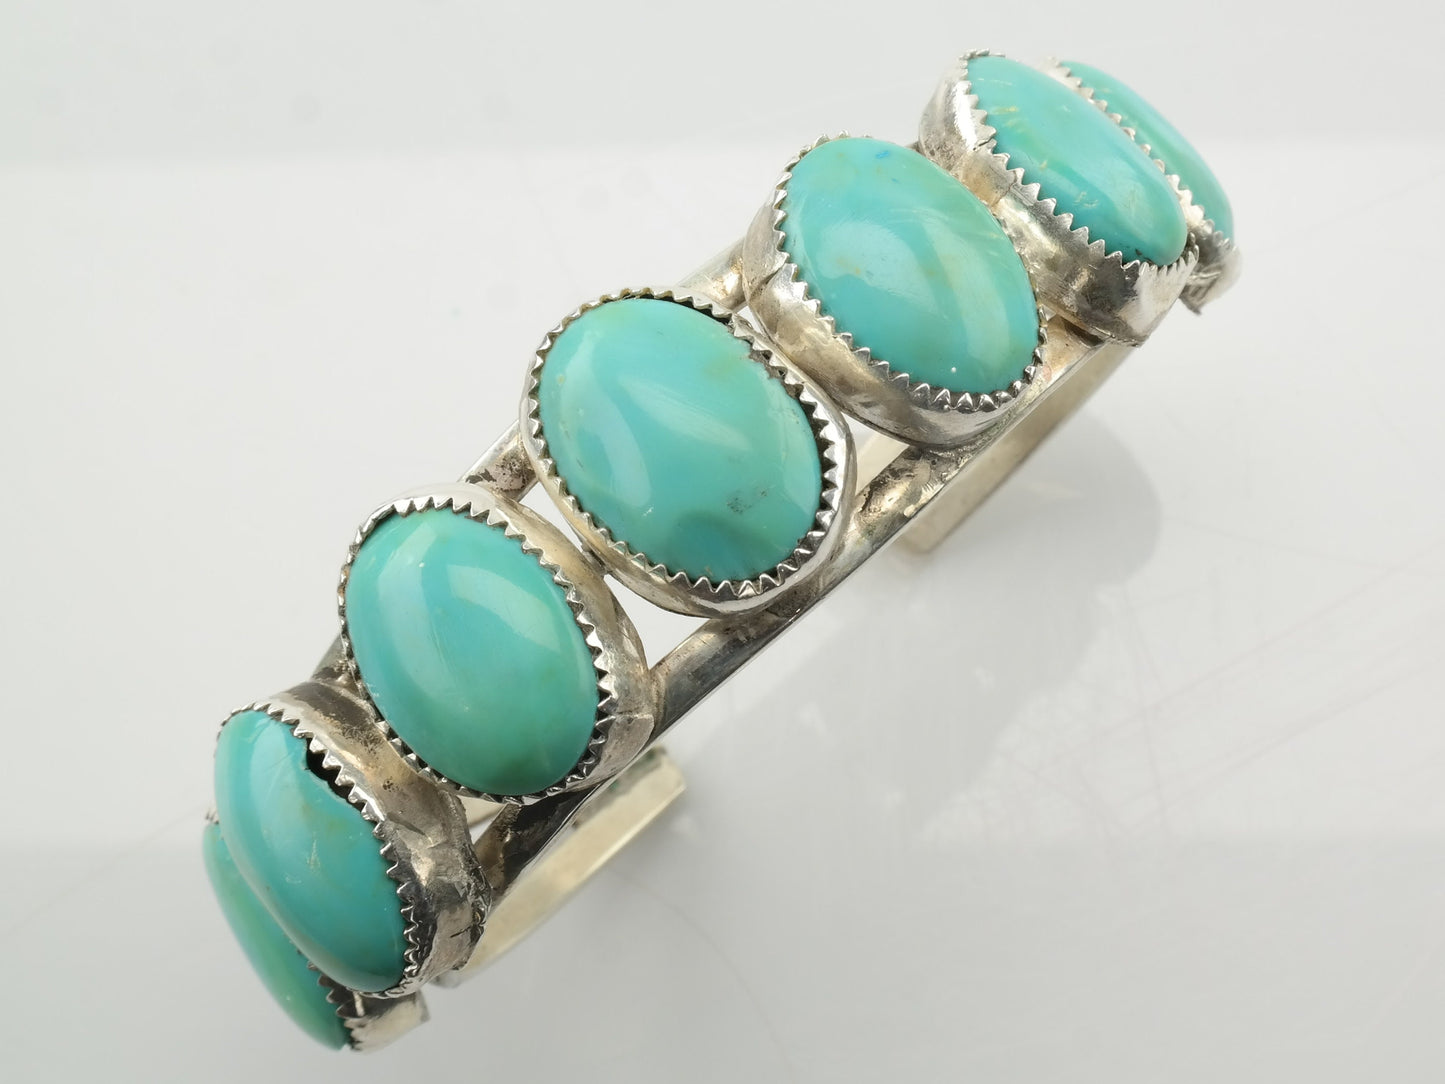 Native American Sterling Silver Cuff Bracelet Turquoise Row